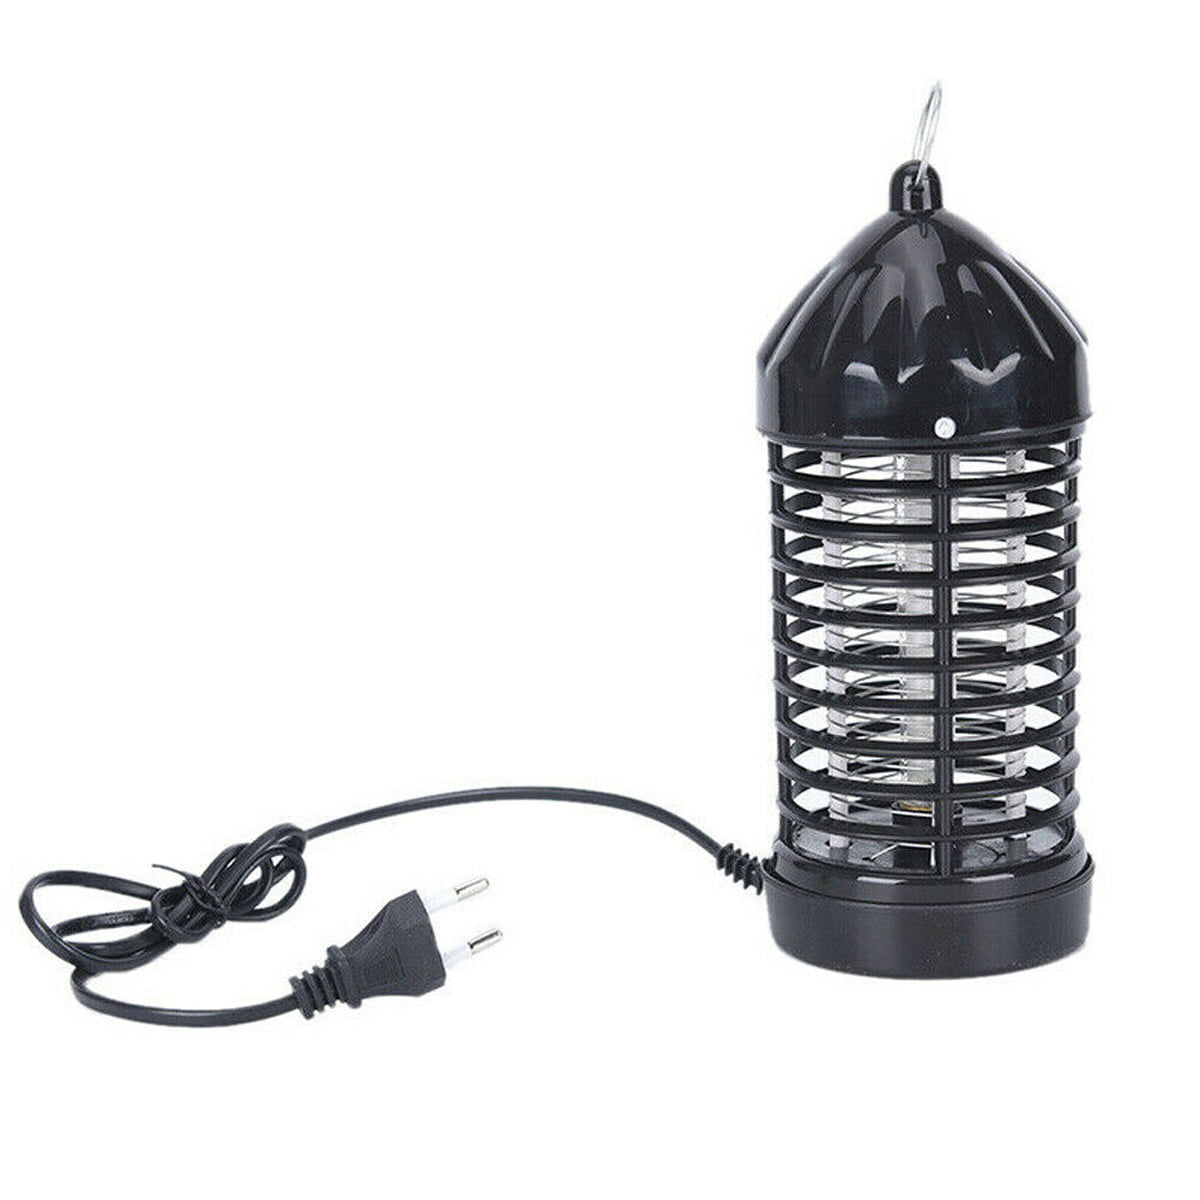 Details about   Electric Fly Catcher Device Fly Trap Killer Pest Killer Cockroaches Insects Trap 